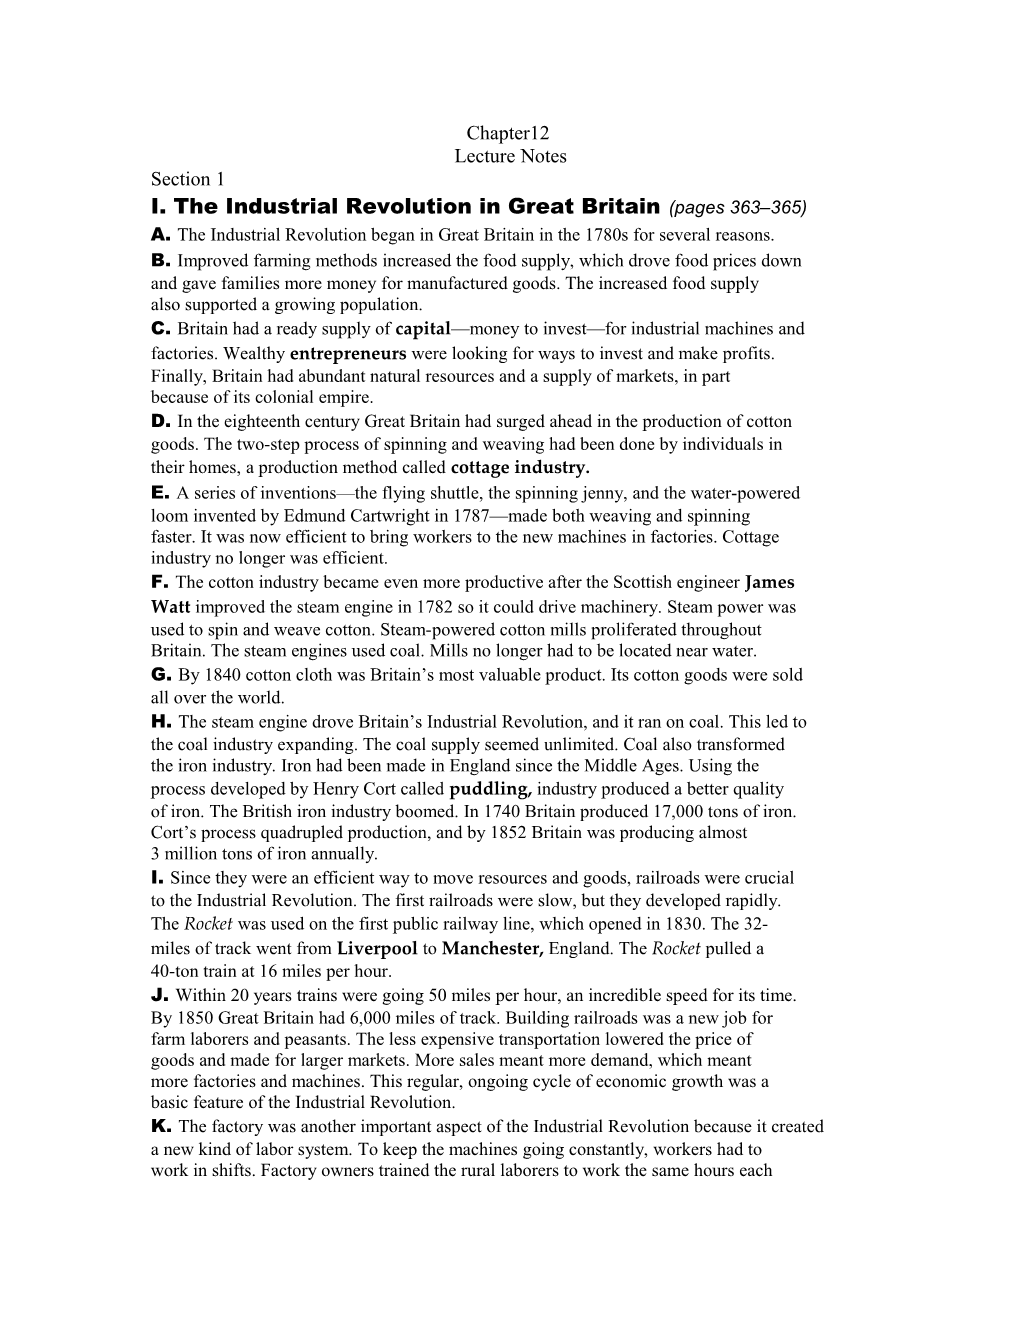 I. the Industrial Revolution in Great Britain (Pages 363 365)